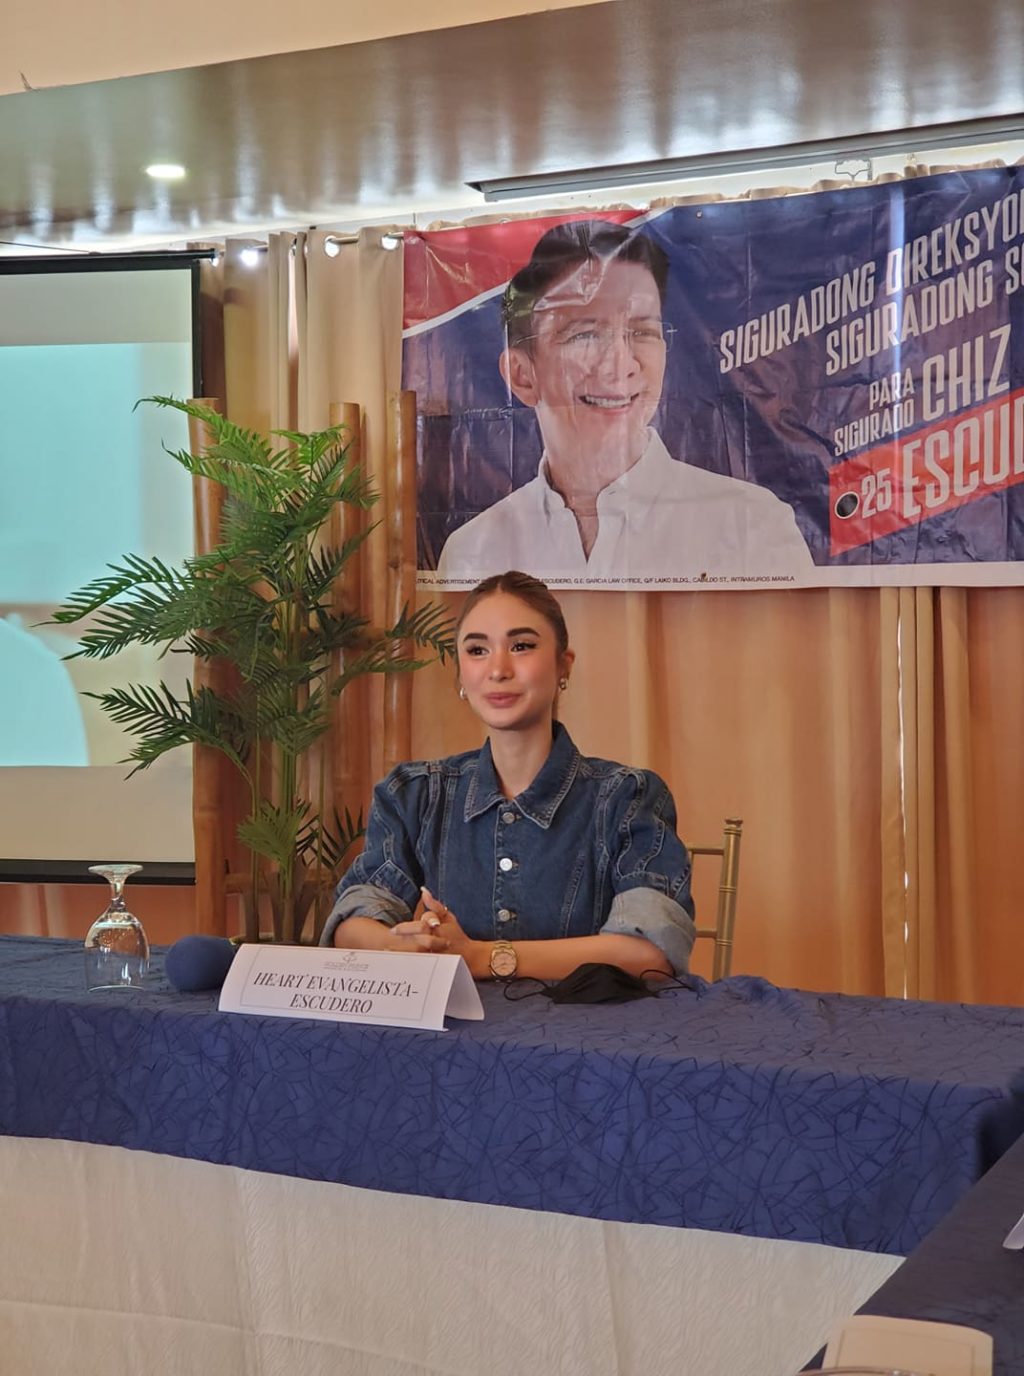 HEART EVANGELISTA CAMPAIGS FOR CHIZ IN CEBU. Heart Evangelista-Escudero campaigns for her husband, Chiz Escudero, who is running for a Senate seat in the coming elections. | Jewil Anne M. Tabiolo 